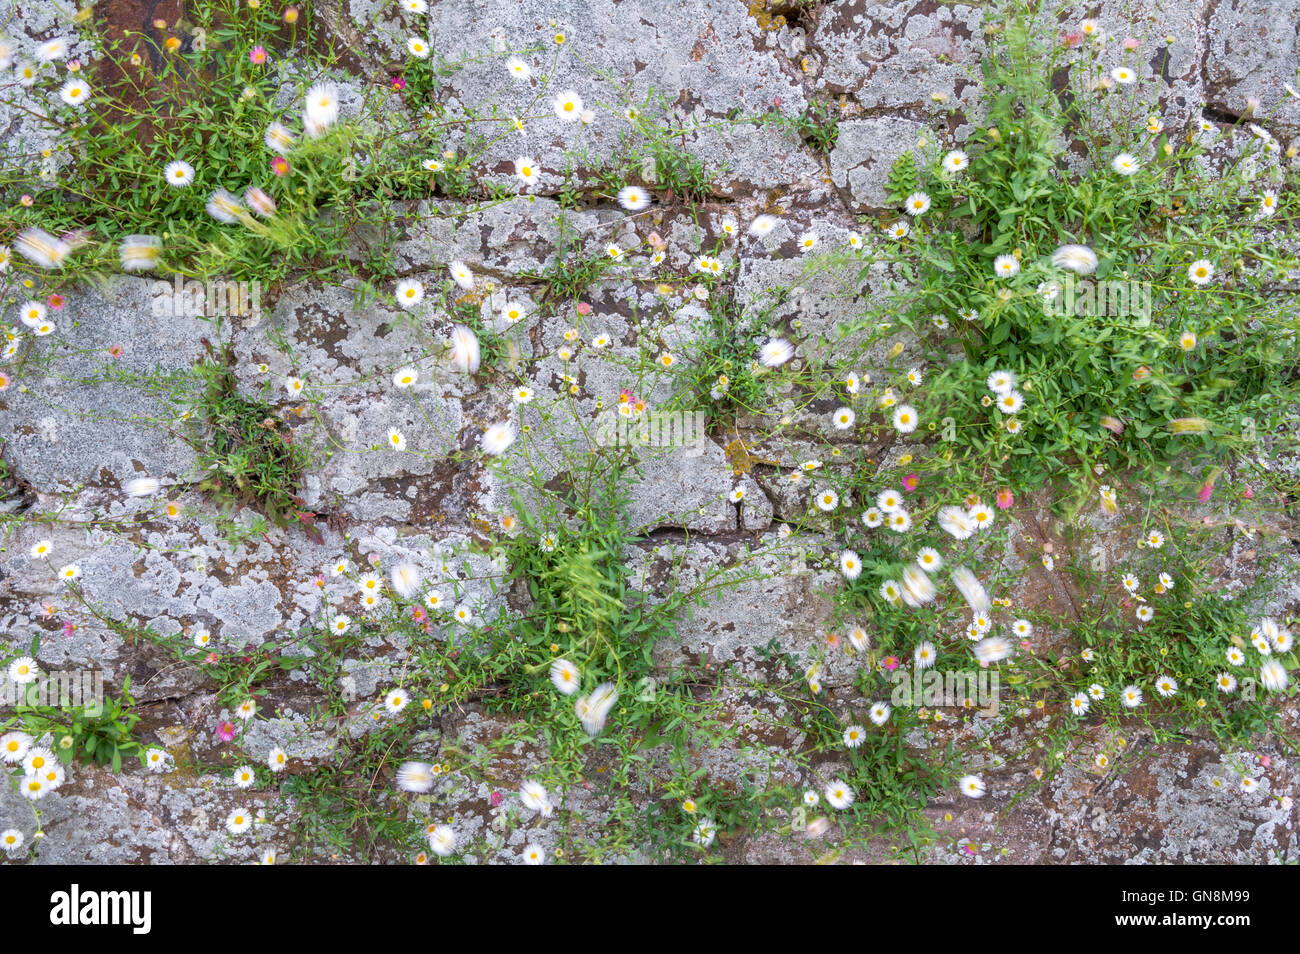 Small white daisies flowering on a stone wall and blowing in the wind. Stock Photo